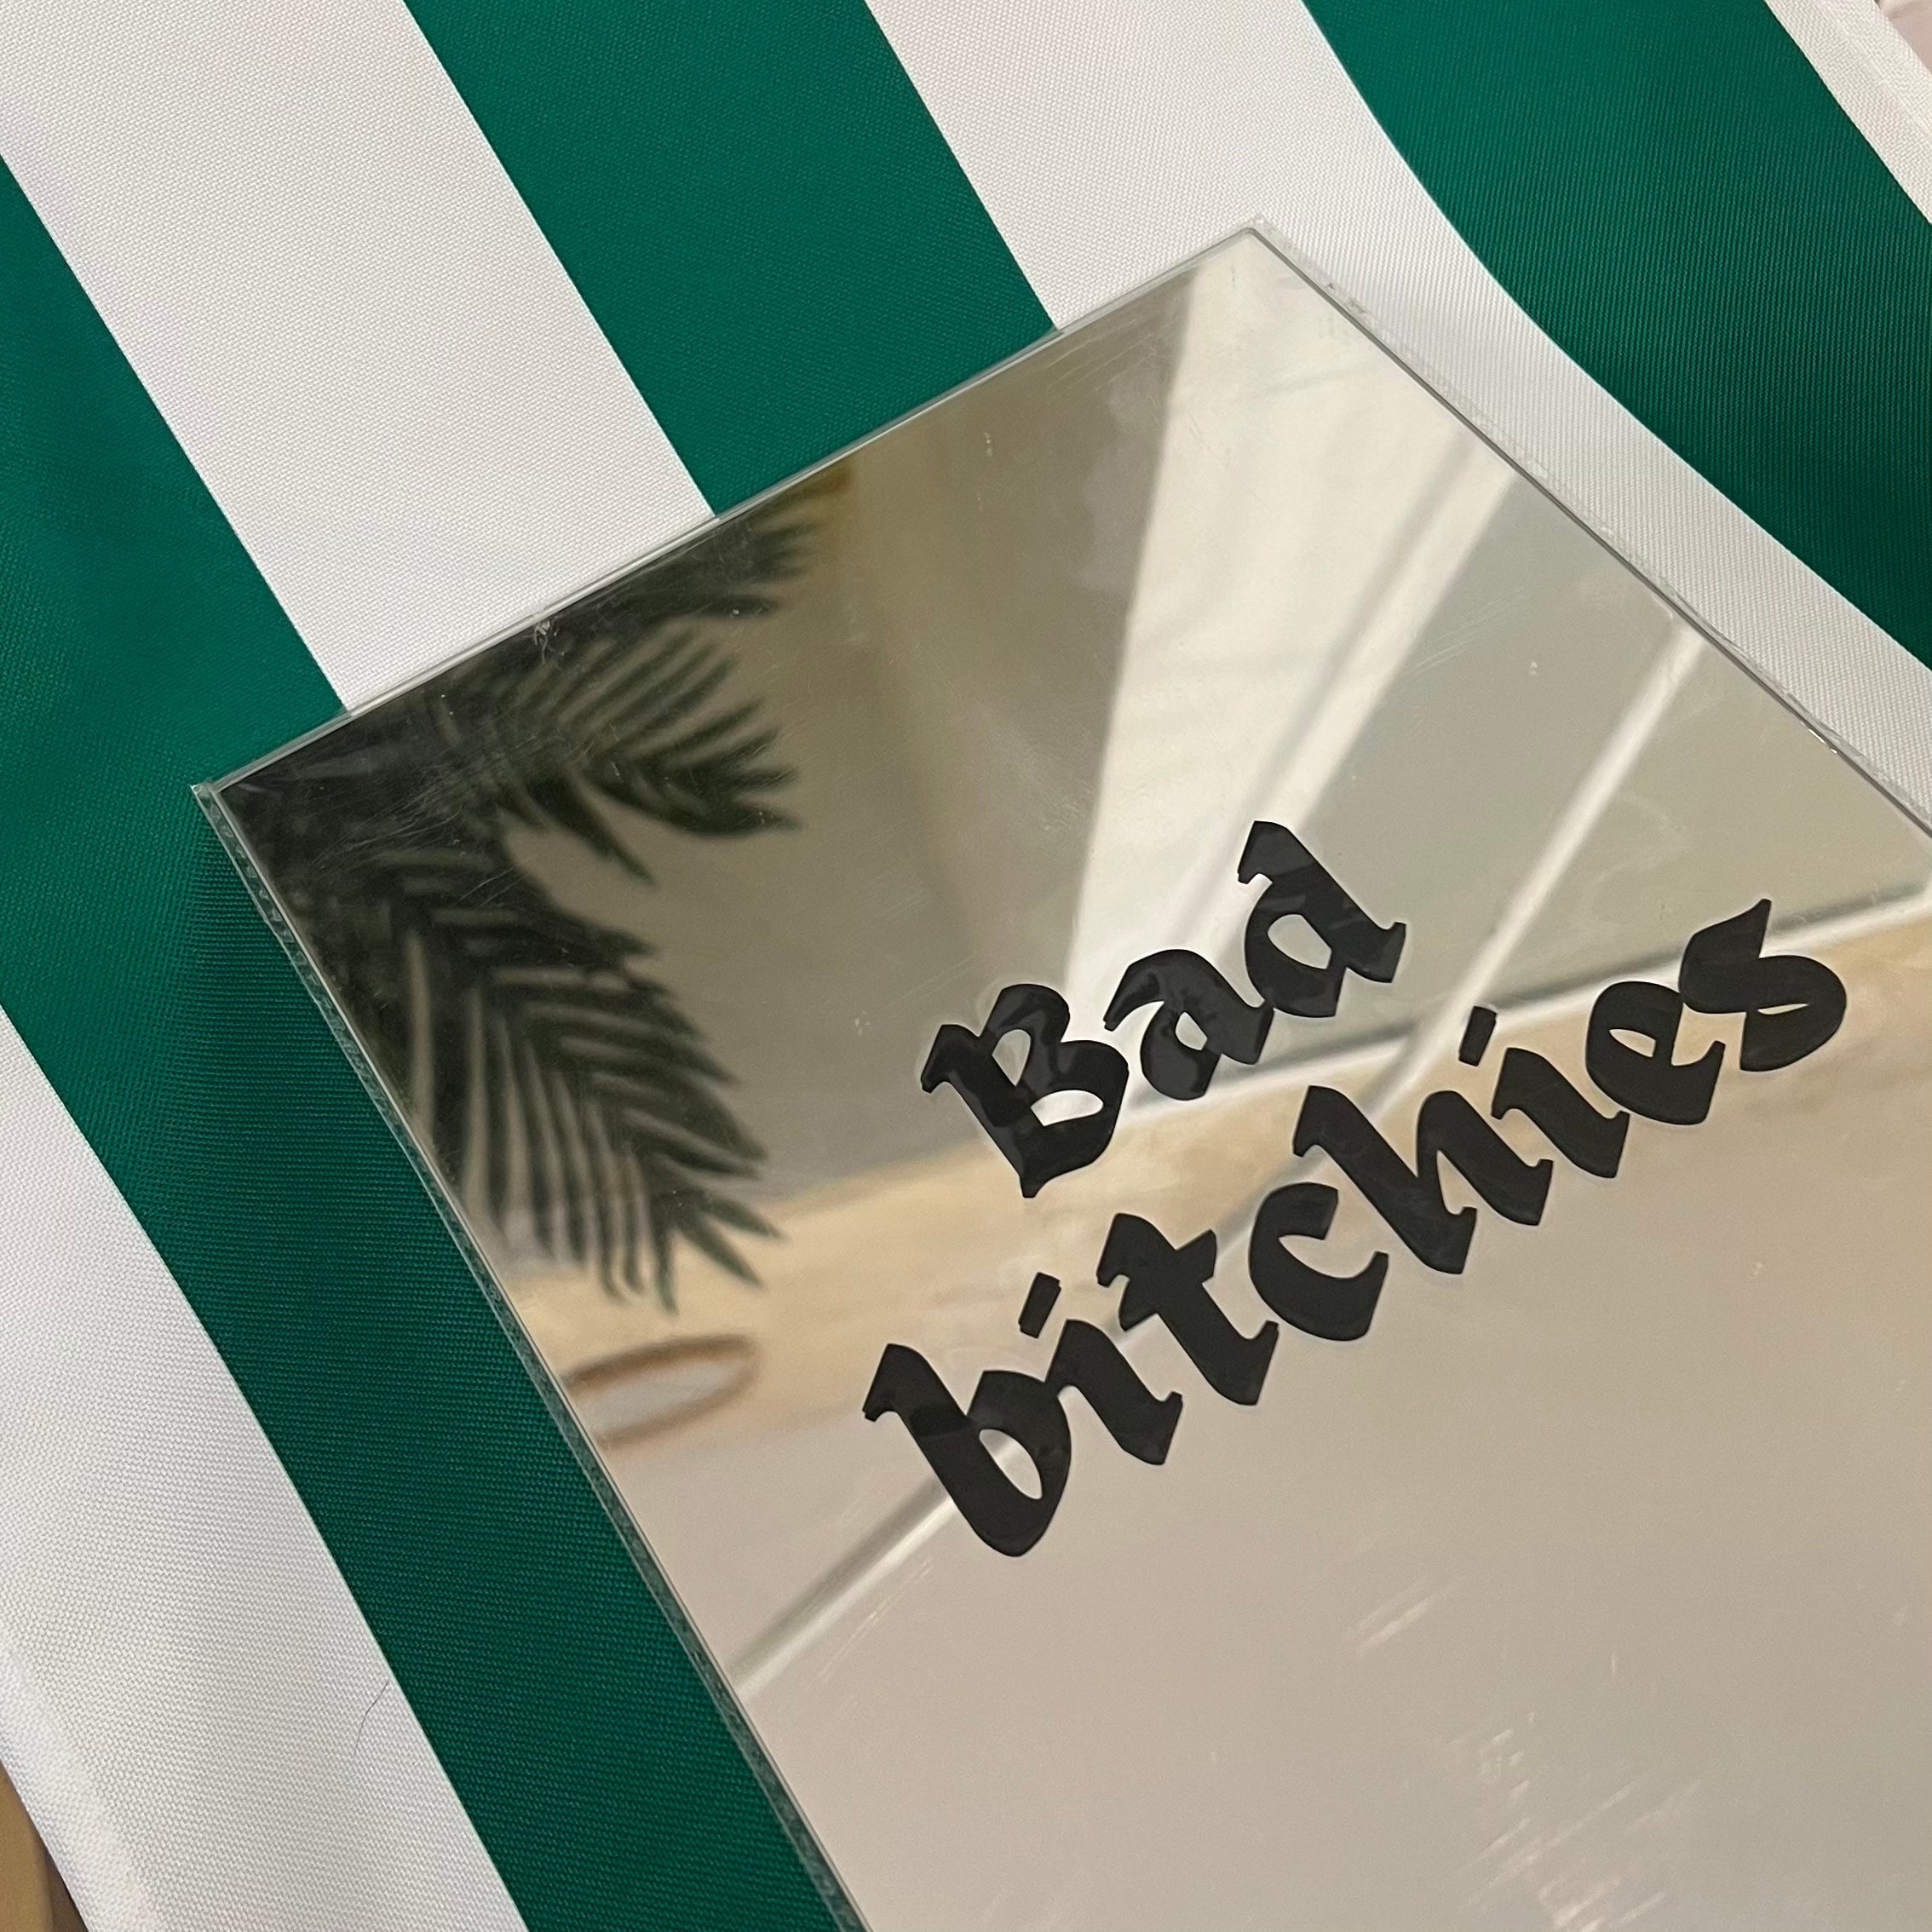 A4 mirror with the inscription "Bad Bitchies" in black script